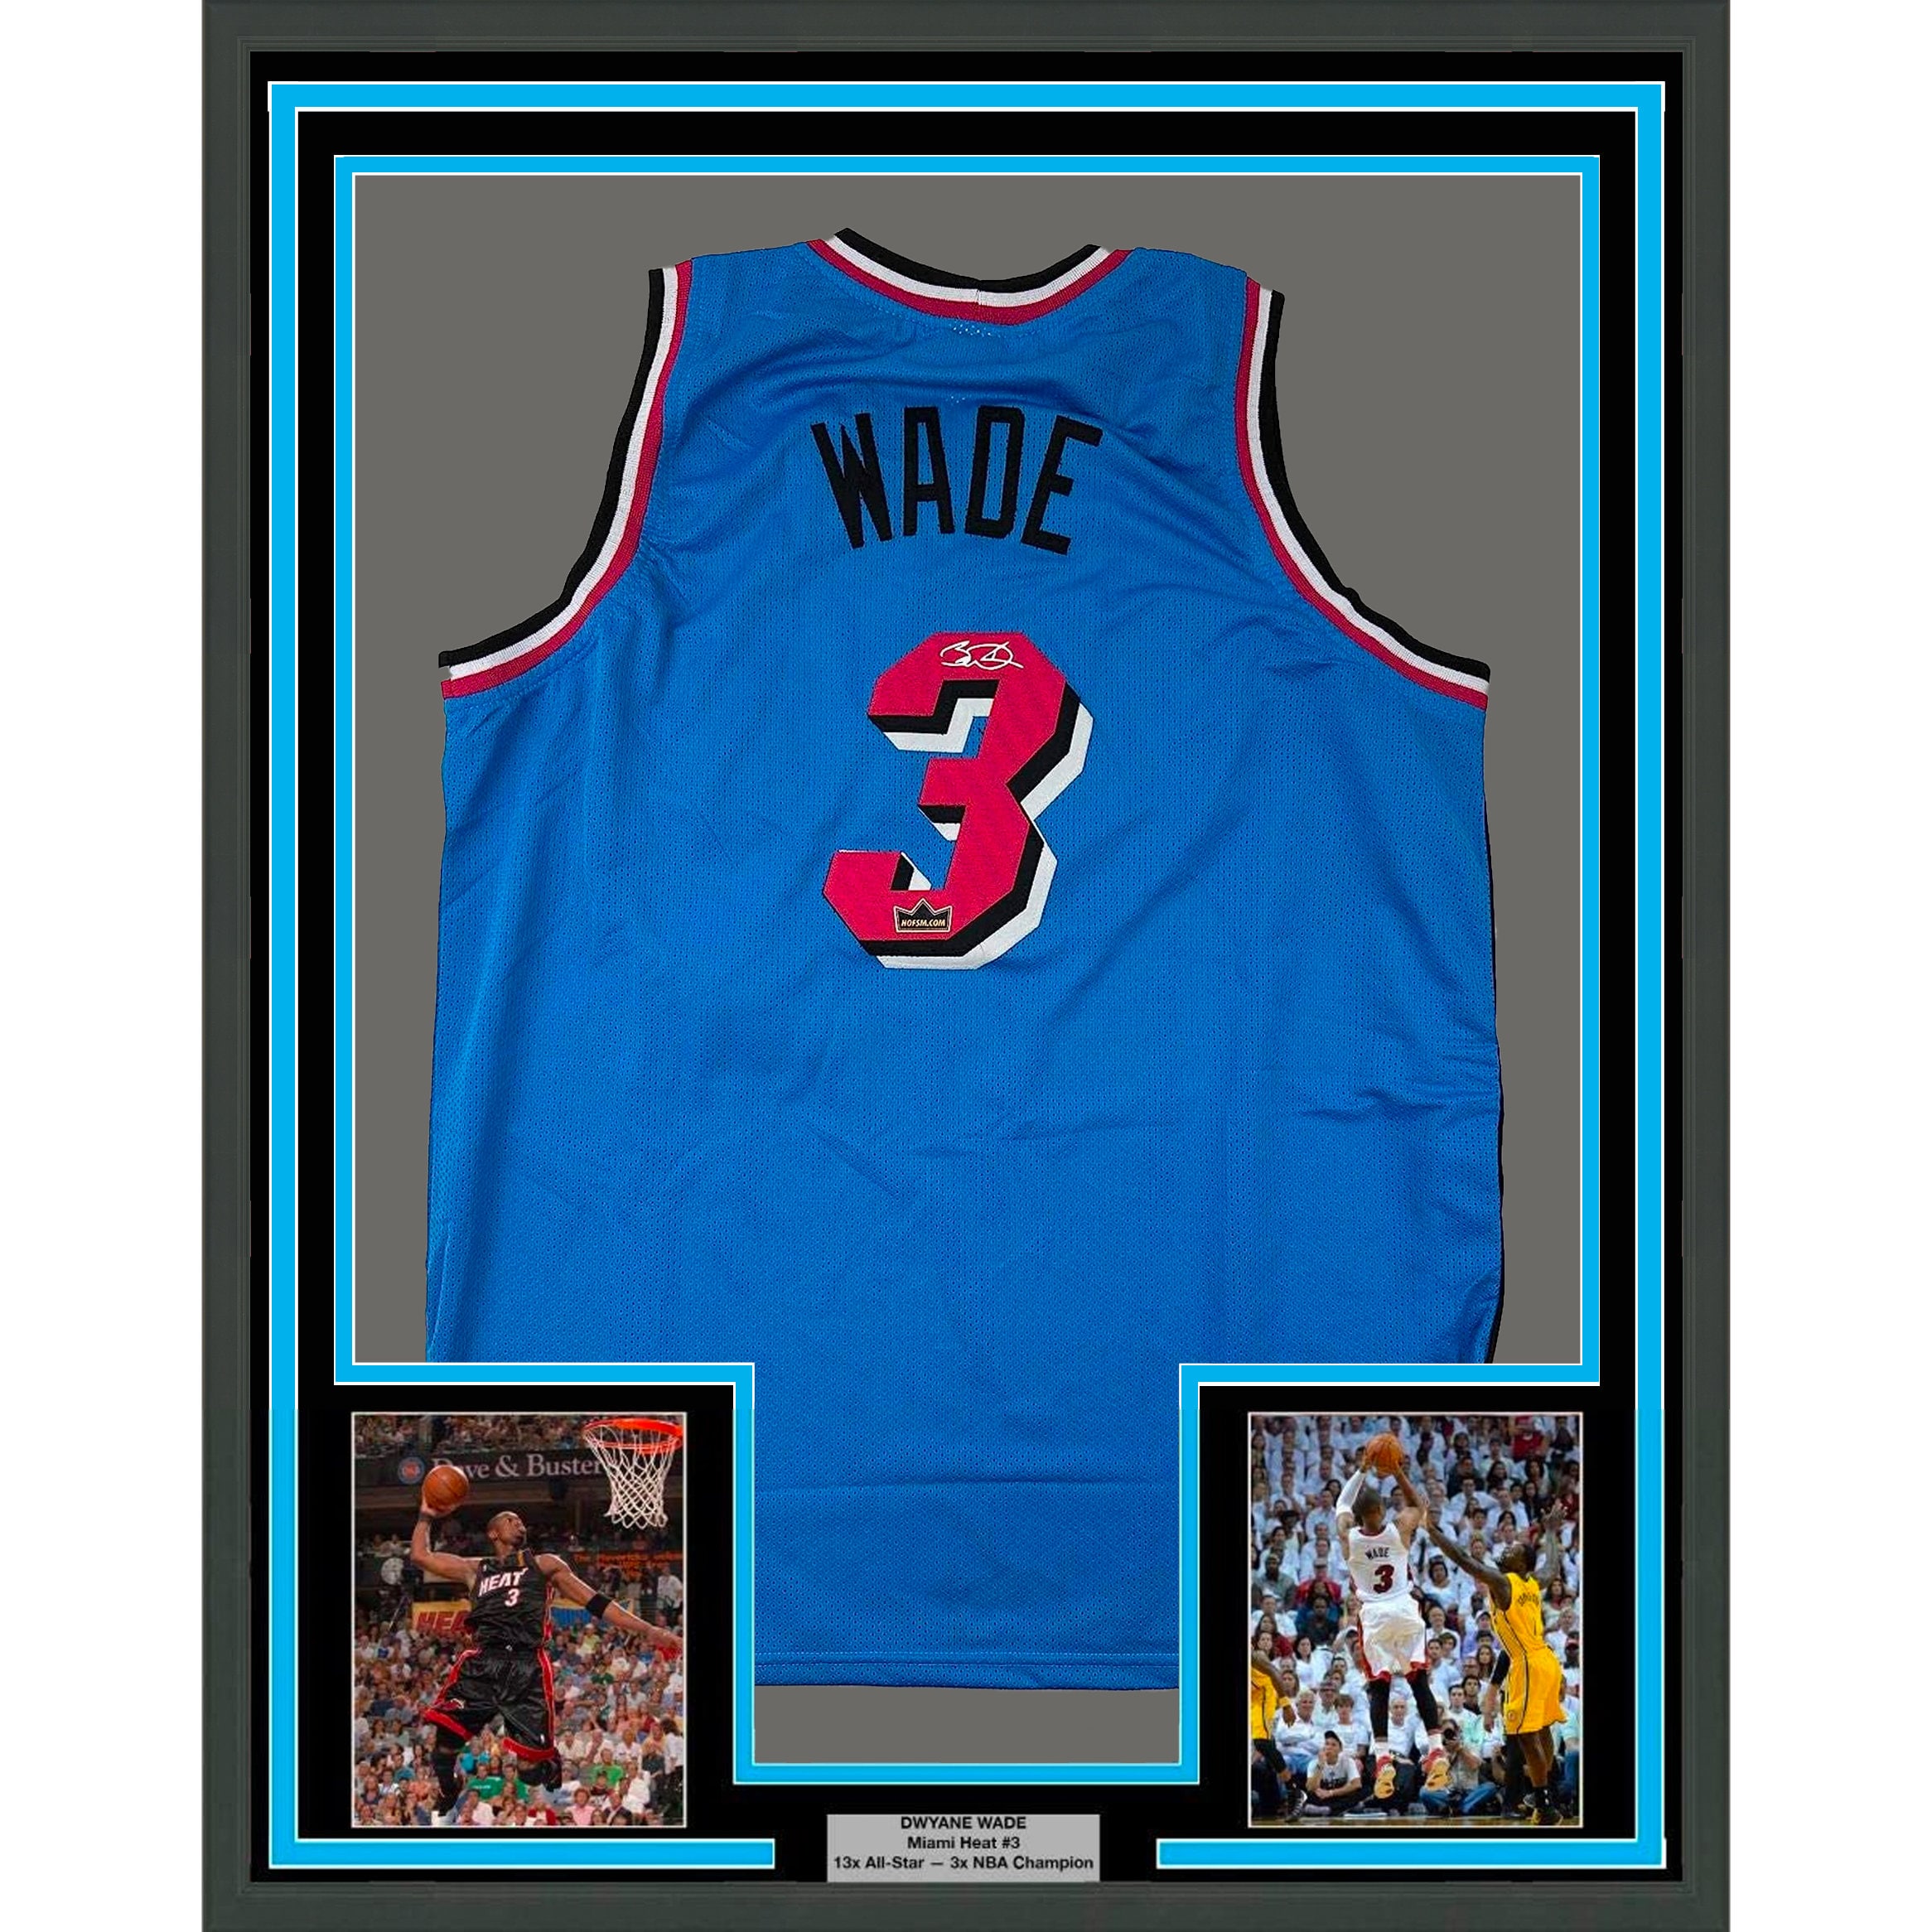 OneofaKindStoopSale Autographed Dwyane Wade Miami Heat Uniform Jersey with Shorts with JSA COA.